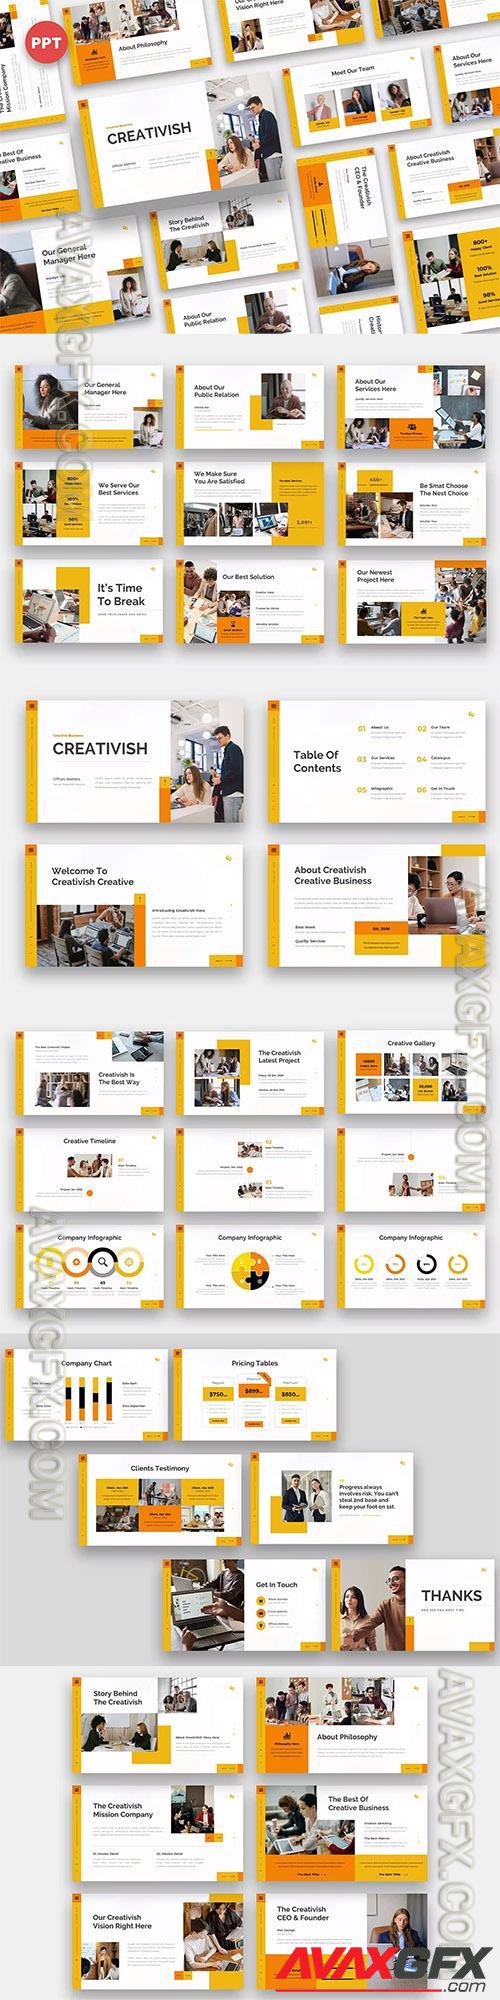 Creativish - Creative Business Powerpoint and Keynote Templates